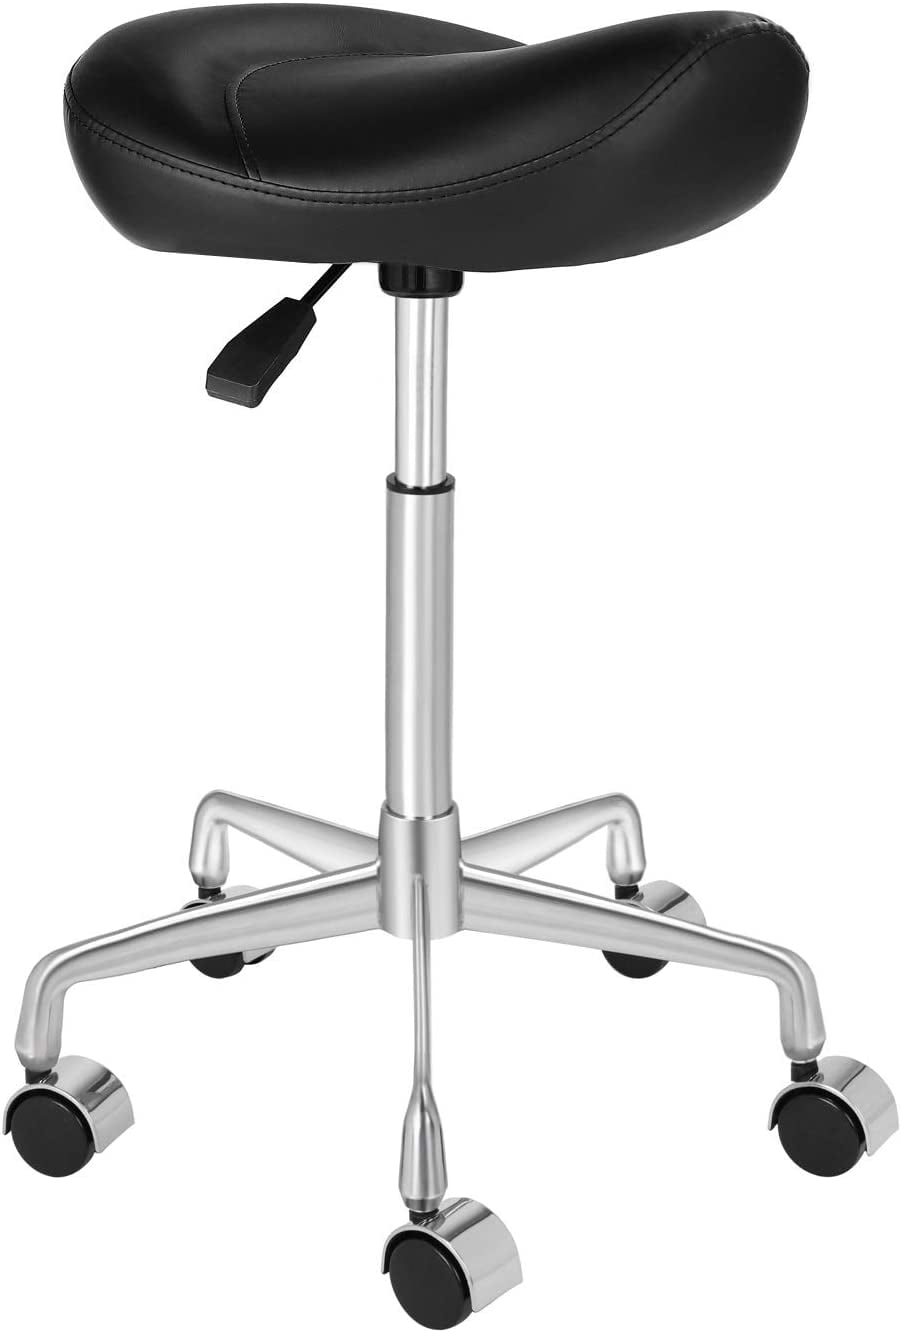 Portable Ergonomic Office Chair - Make Any Chair a Swinging Saddle Chair  with Portable Saddle Stool - Makes A …